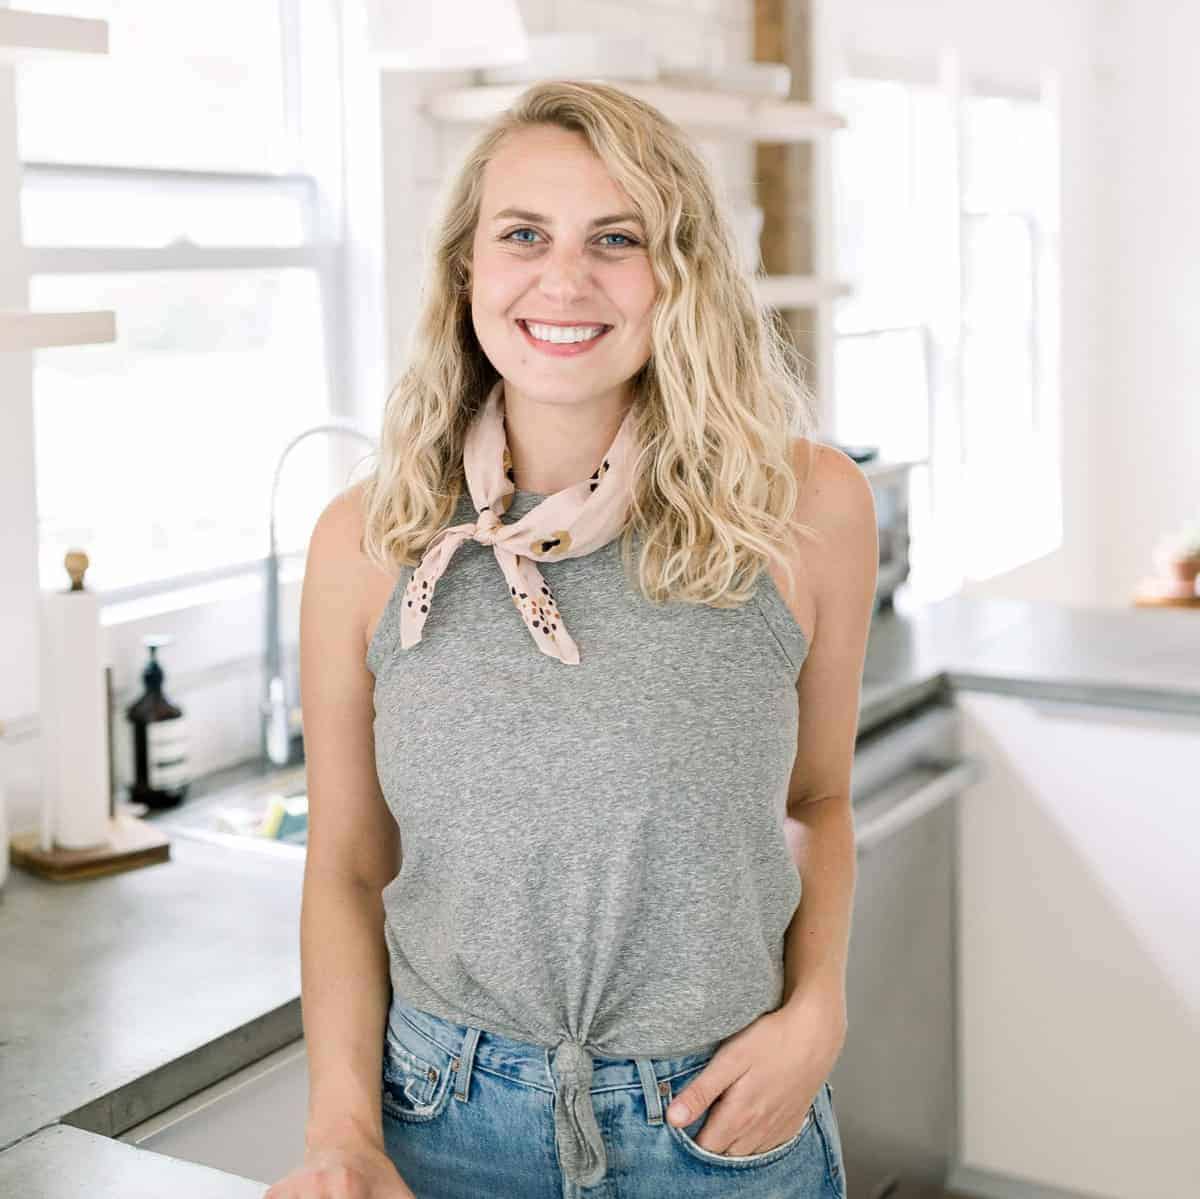 a blonde woman in a gray tank top and jeans standing in a kitchen, passionate about cheese.